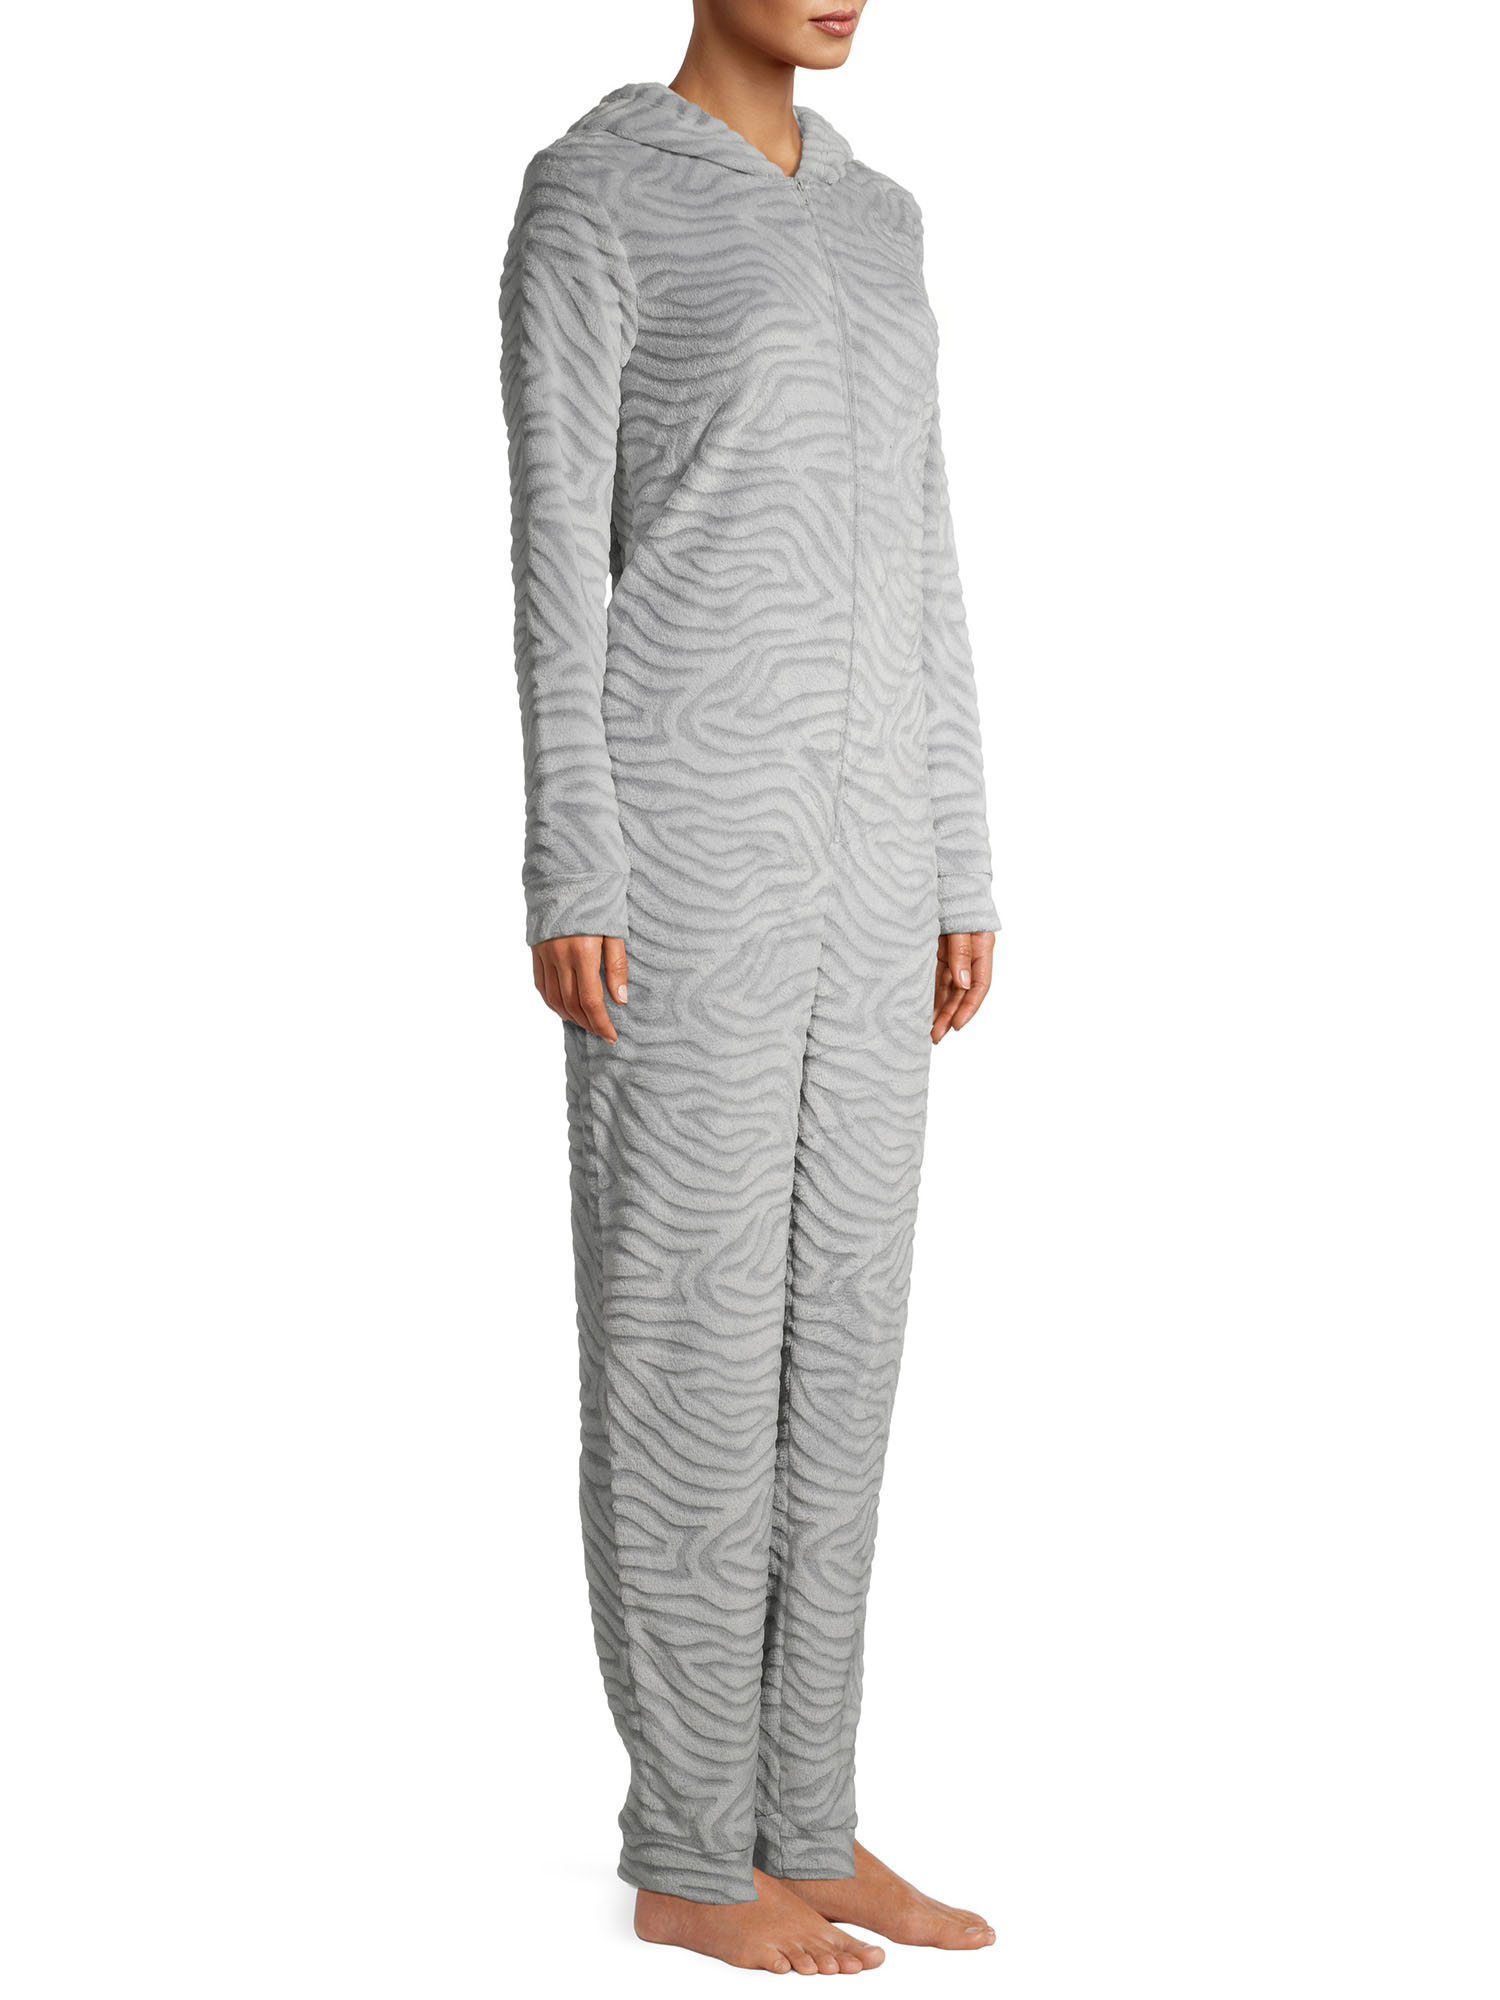 George Women's Character Pajama Union Suit - image 5 of 6